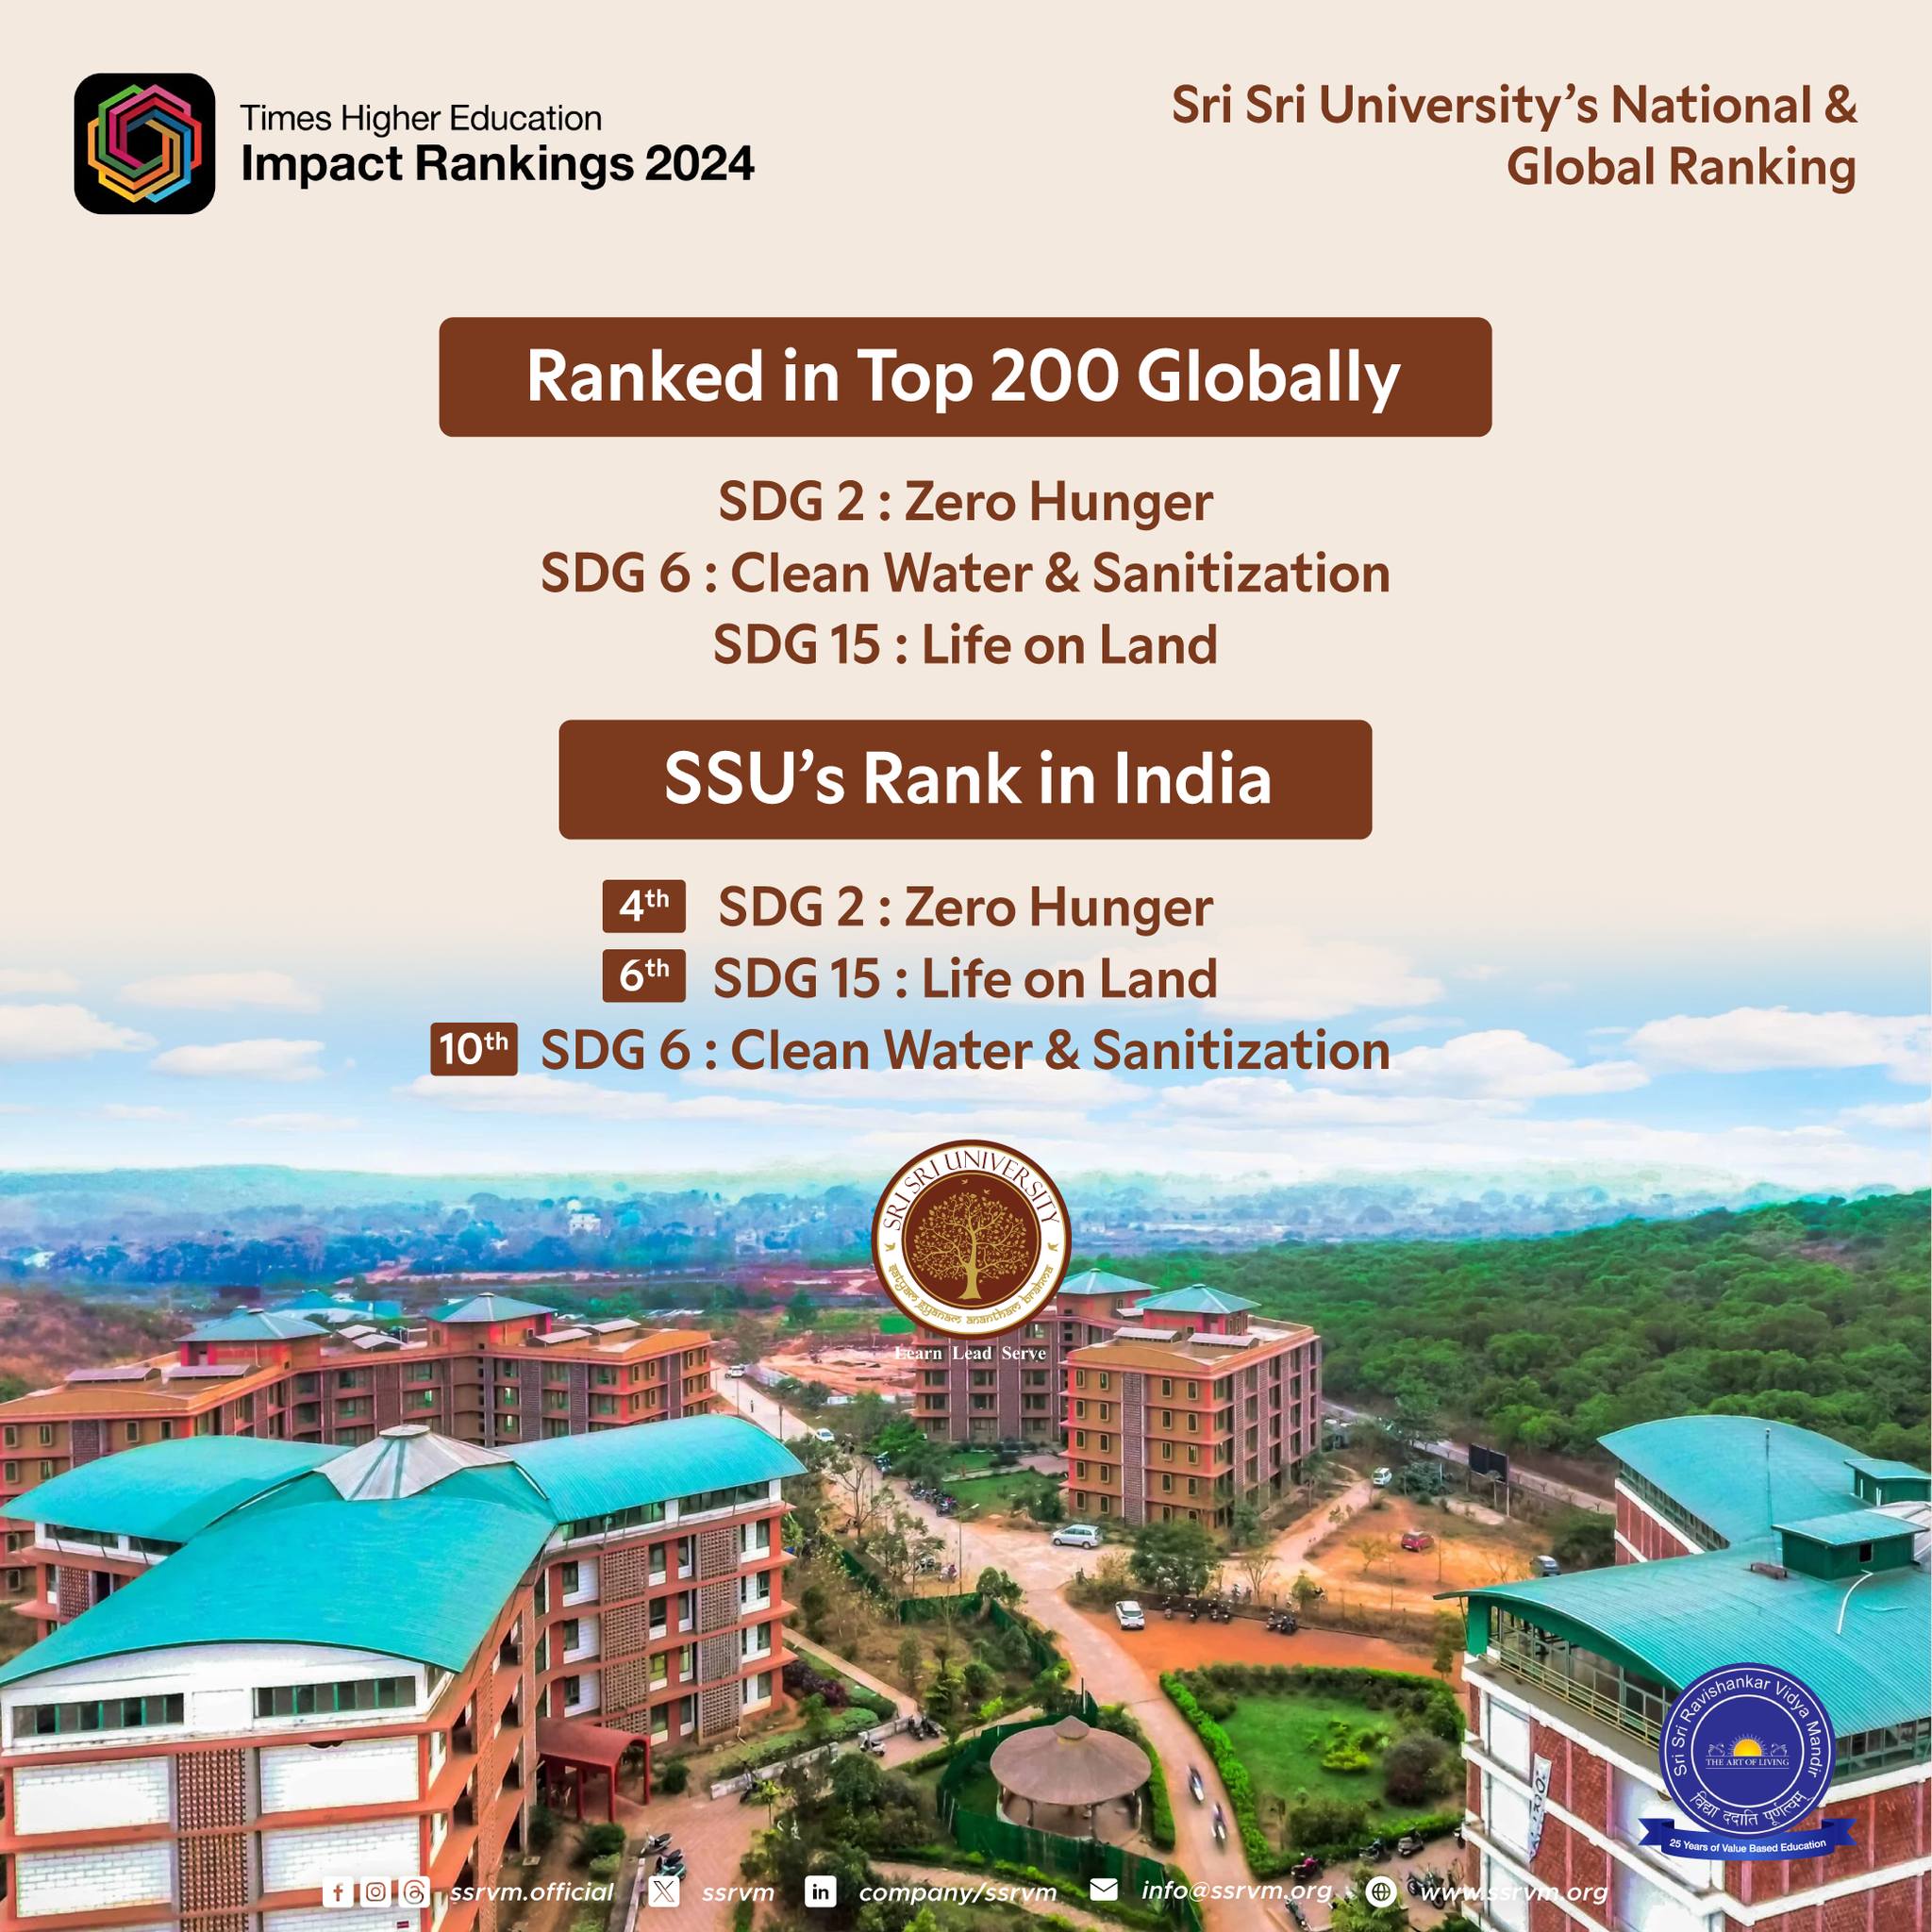 SSU has been ranked top 200 globally, and in the top 10 in India for excellence in various SDGs 